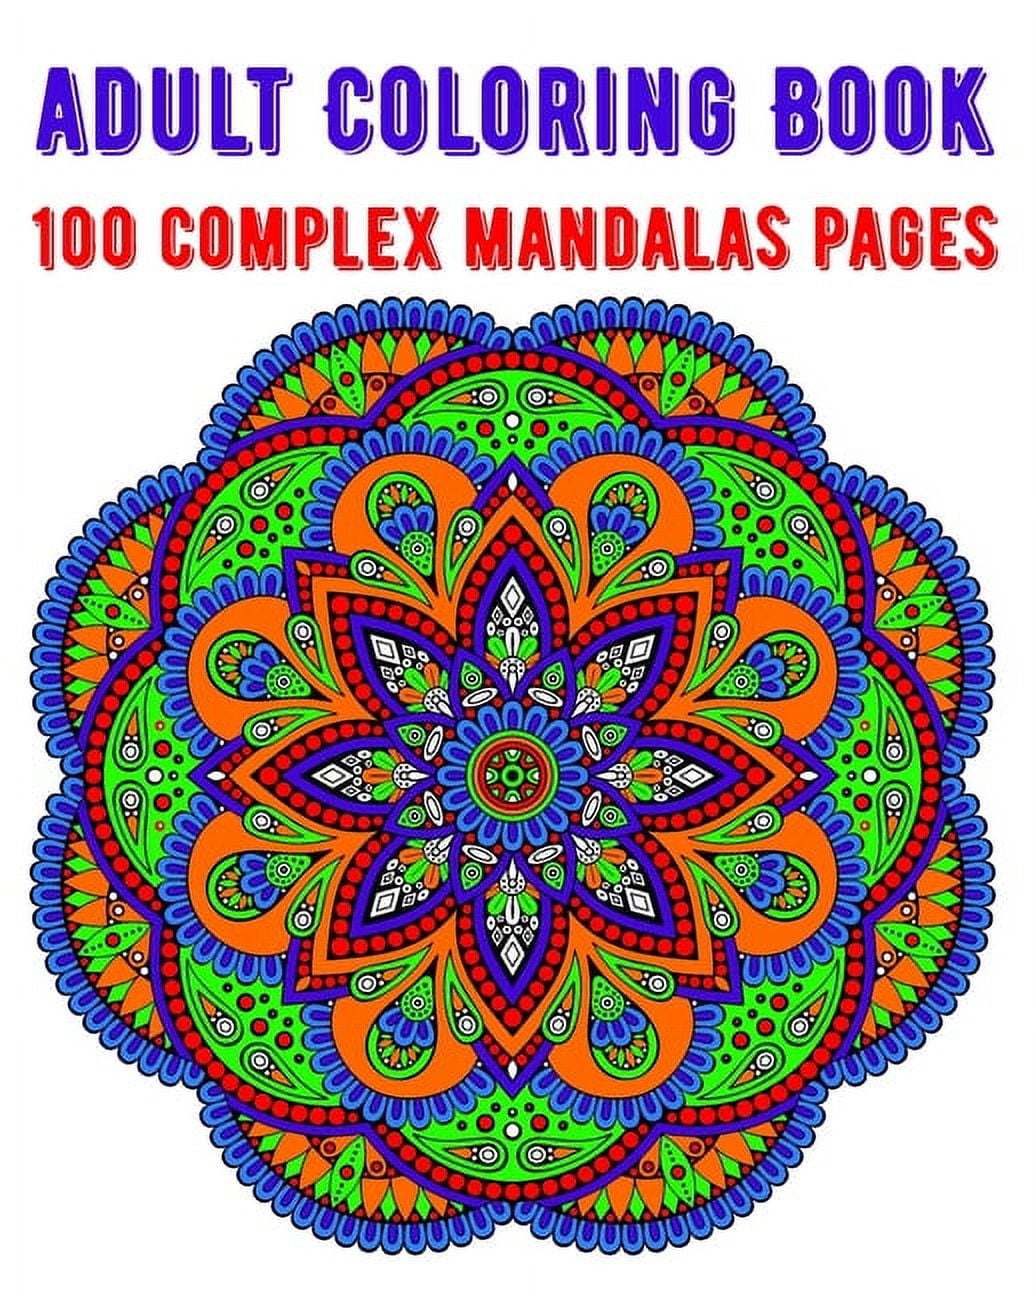 Bulk Advanced Coloring Books for Adults, Teens - 6 Pc Adult Coloring Book  Set | Relaxation Coloring Bundle with with Mandalas, Moroccan Tile